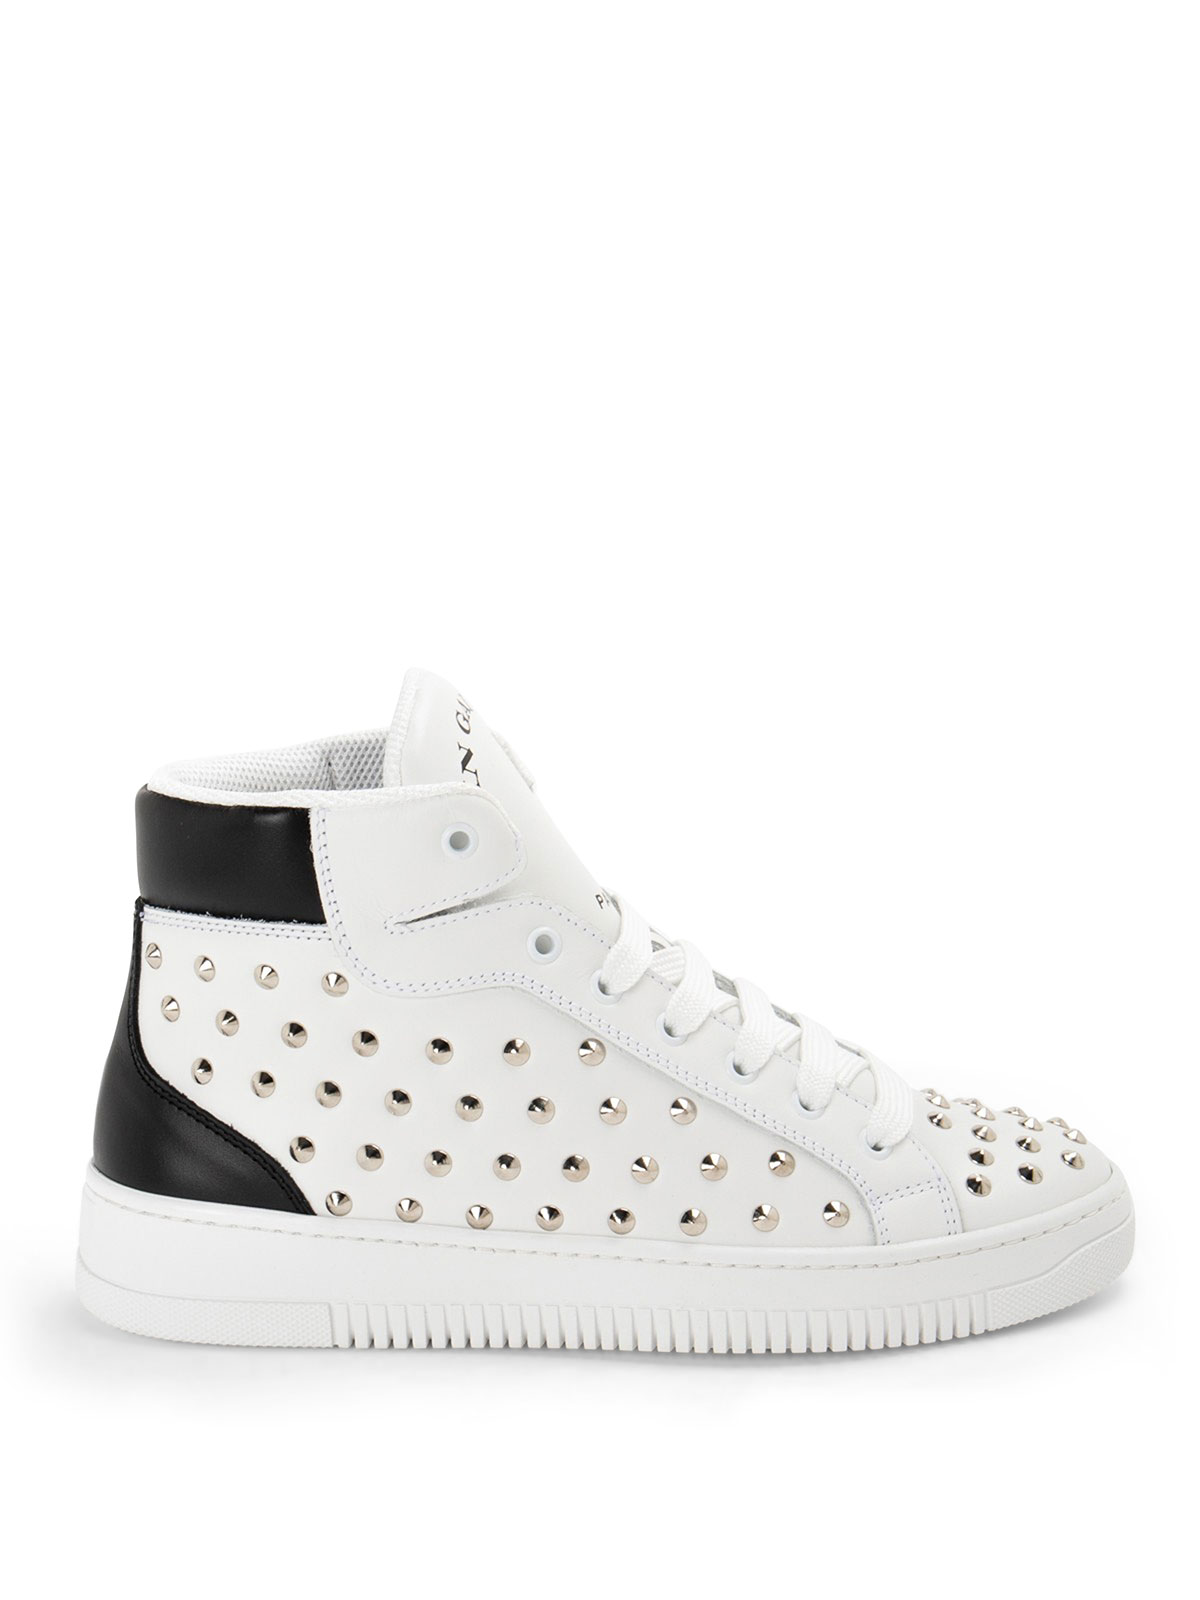 Trainers John Galliano - White leather sneakers - 15566A | iKRIX.com